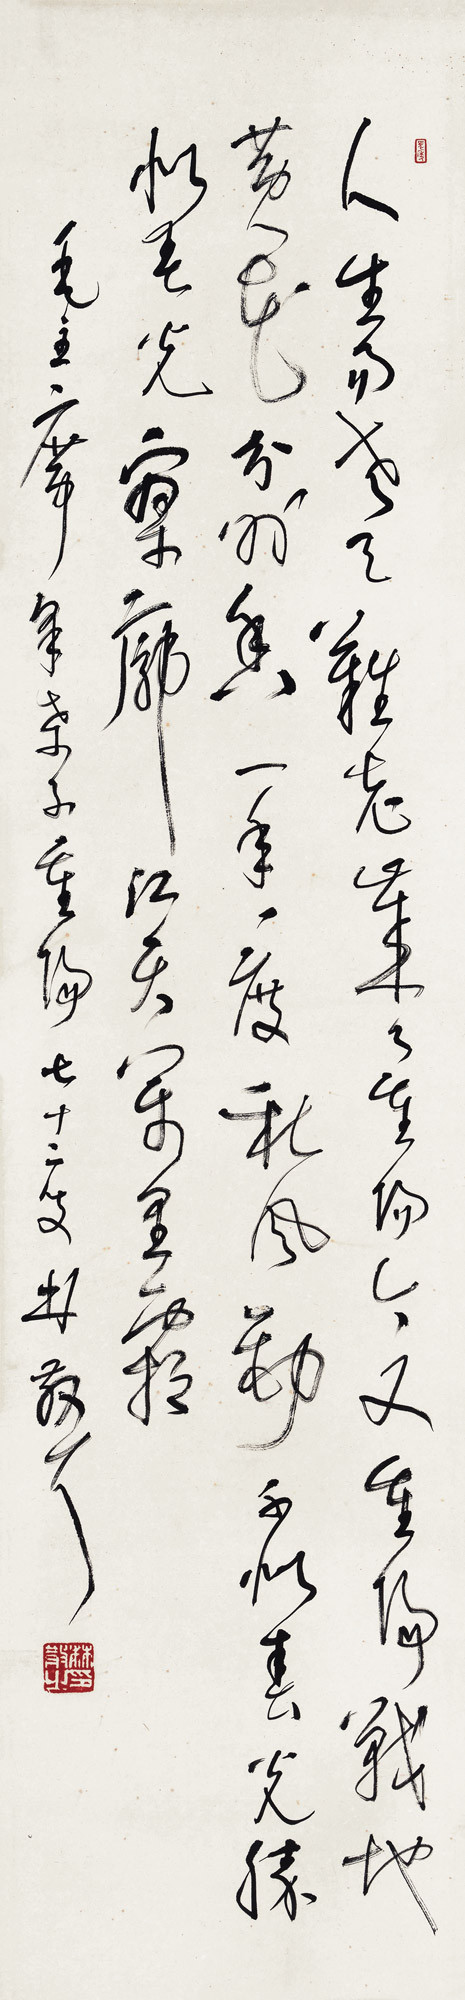 Calligraphic Poem by Chirman MAO in  Curise Script